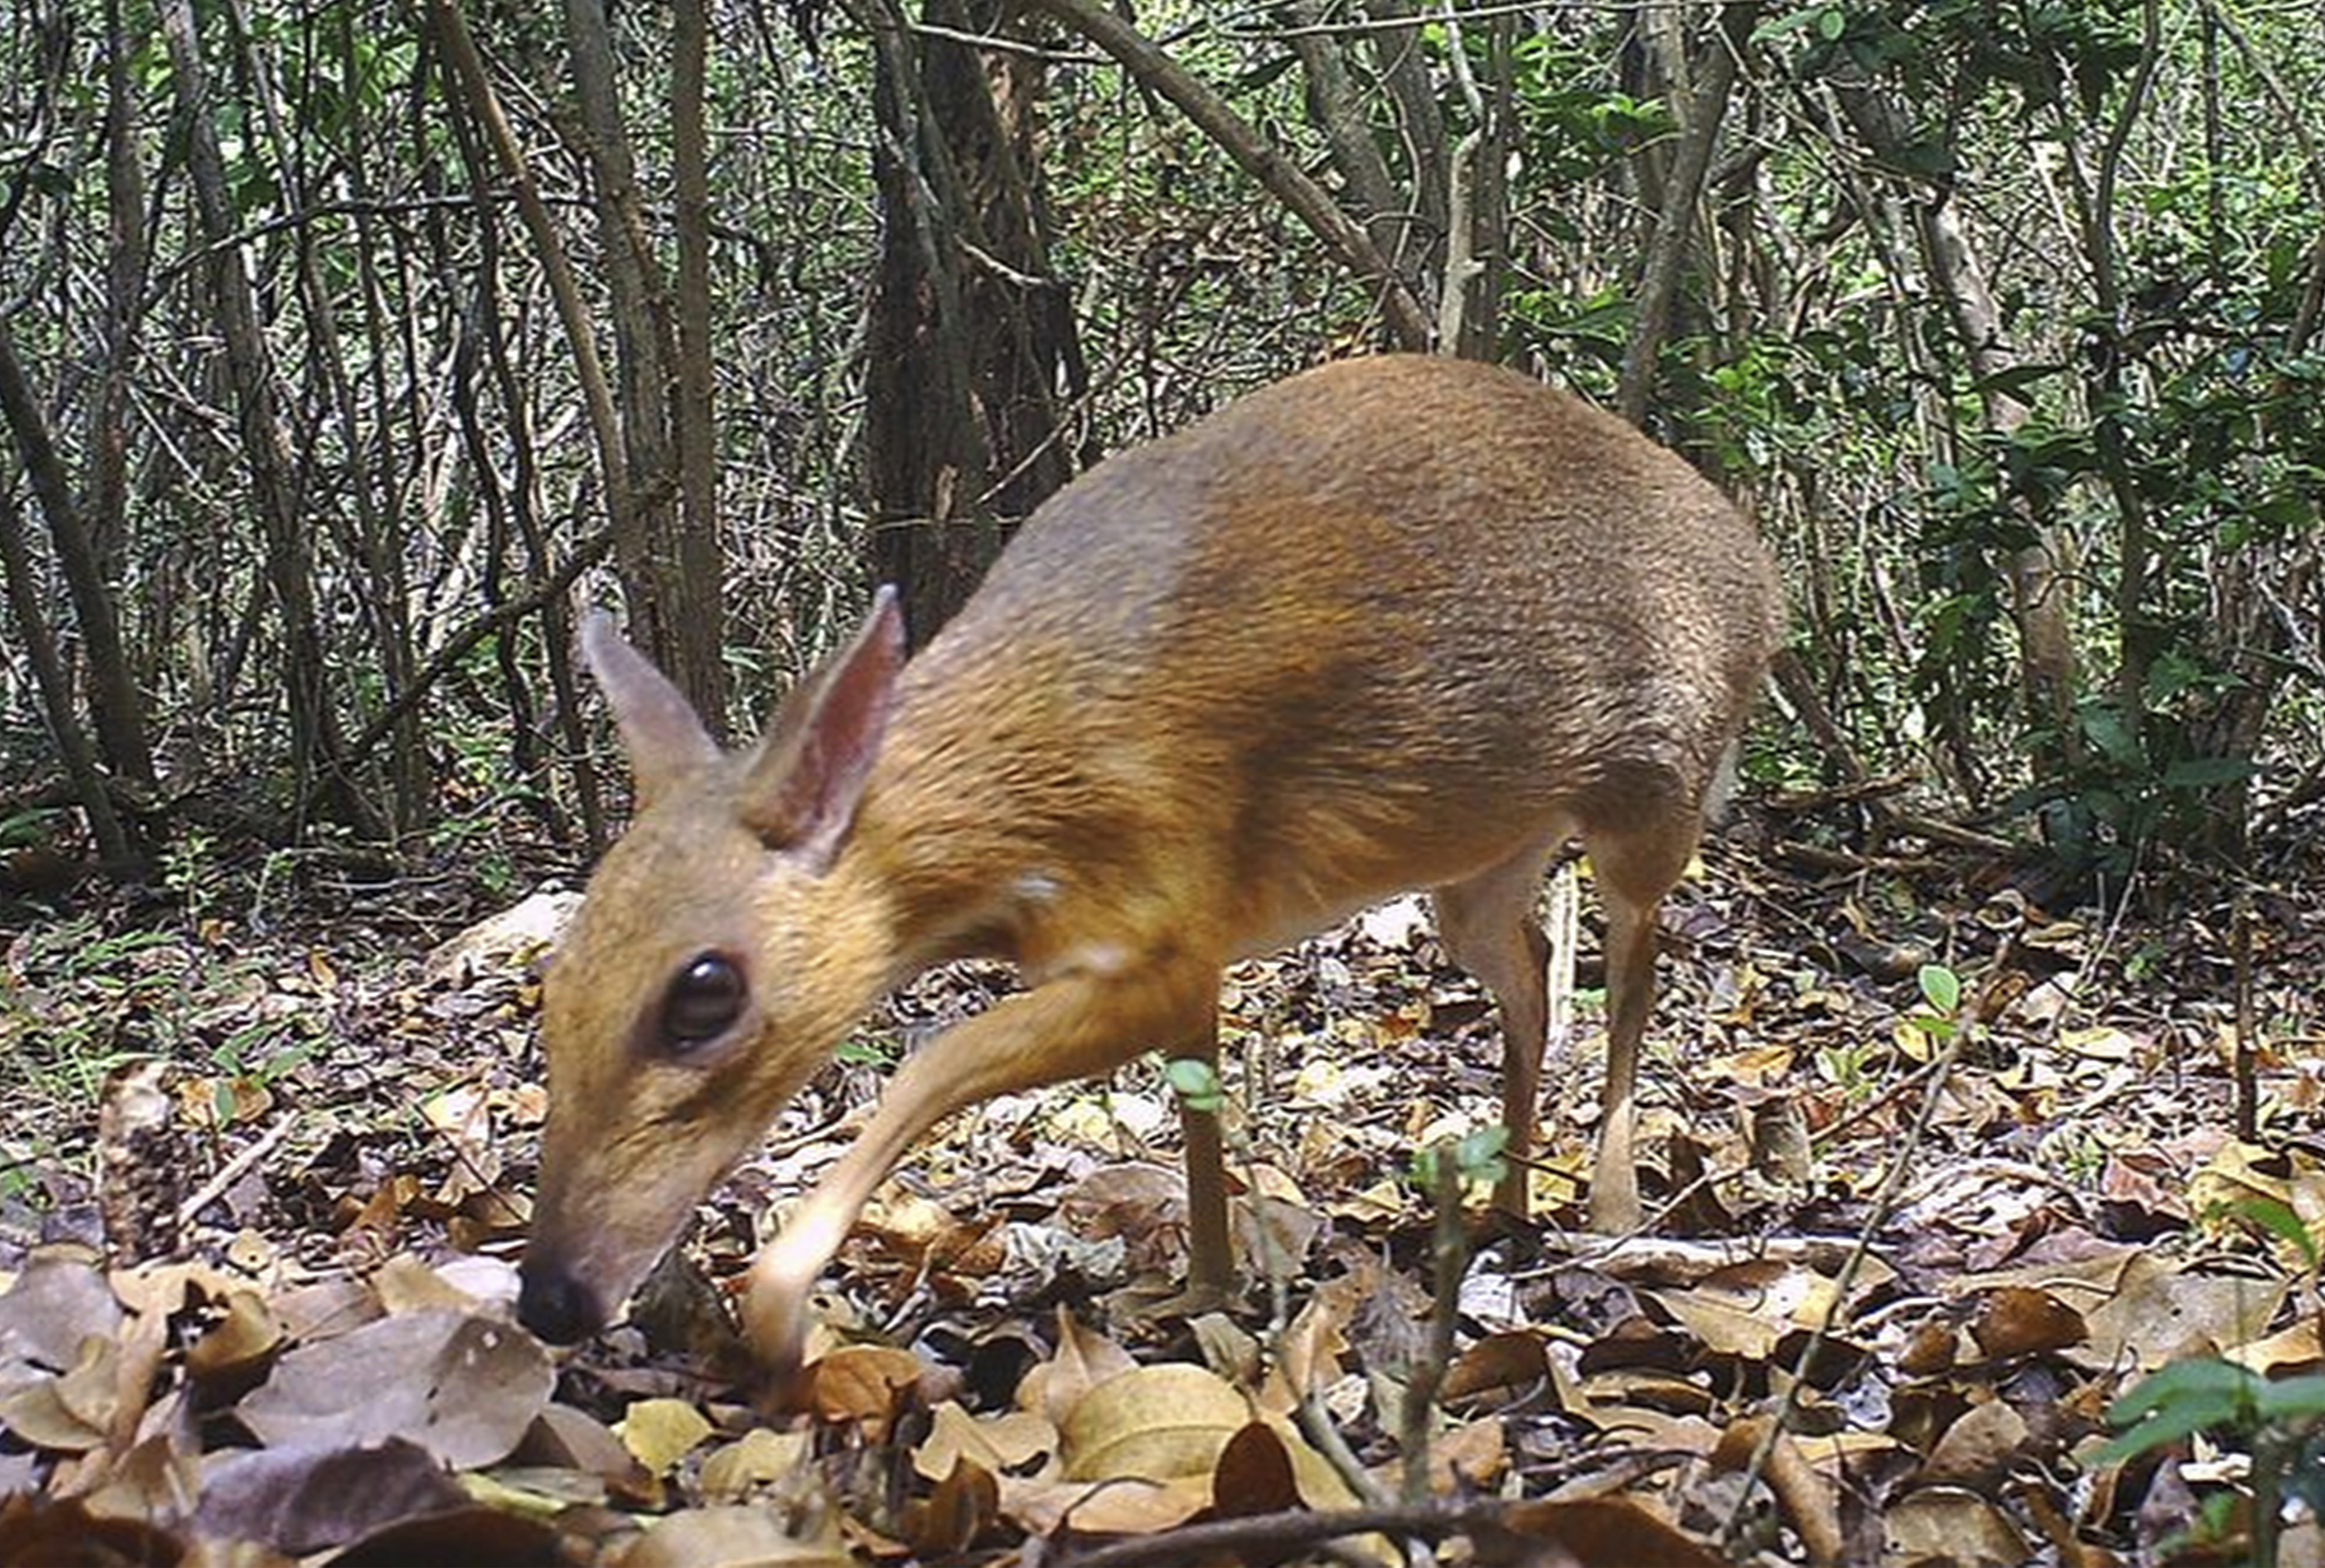 Rare deer-like species photographed for first time in wild